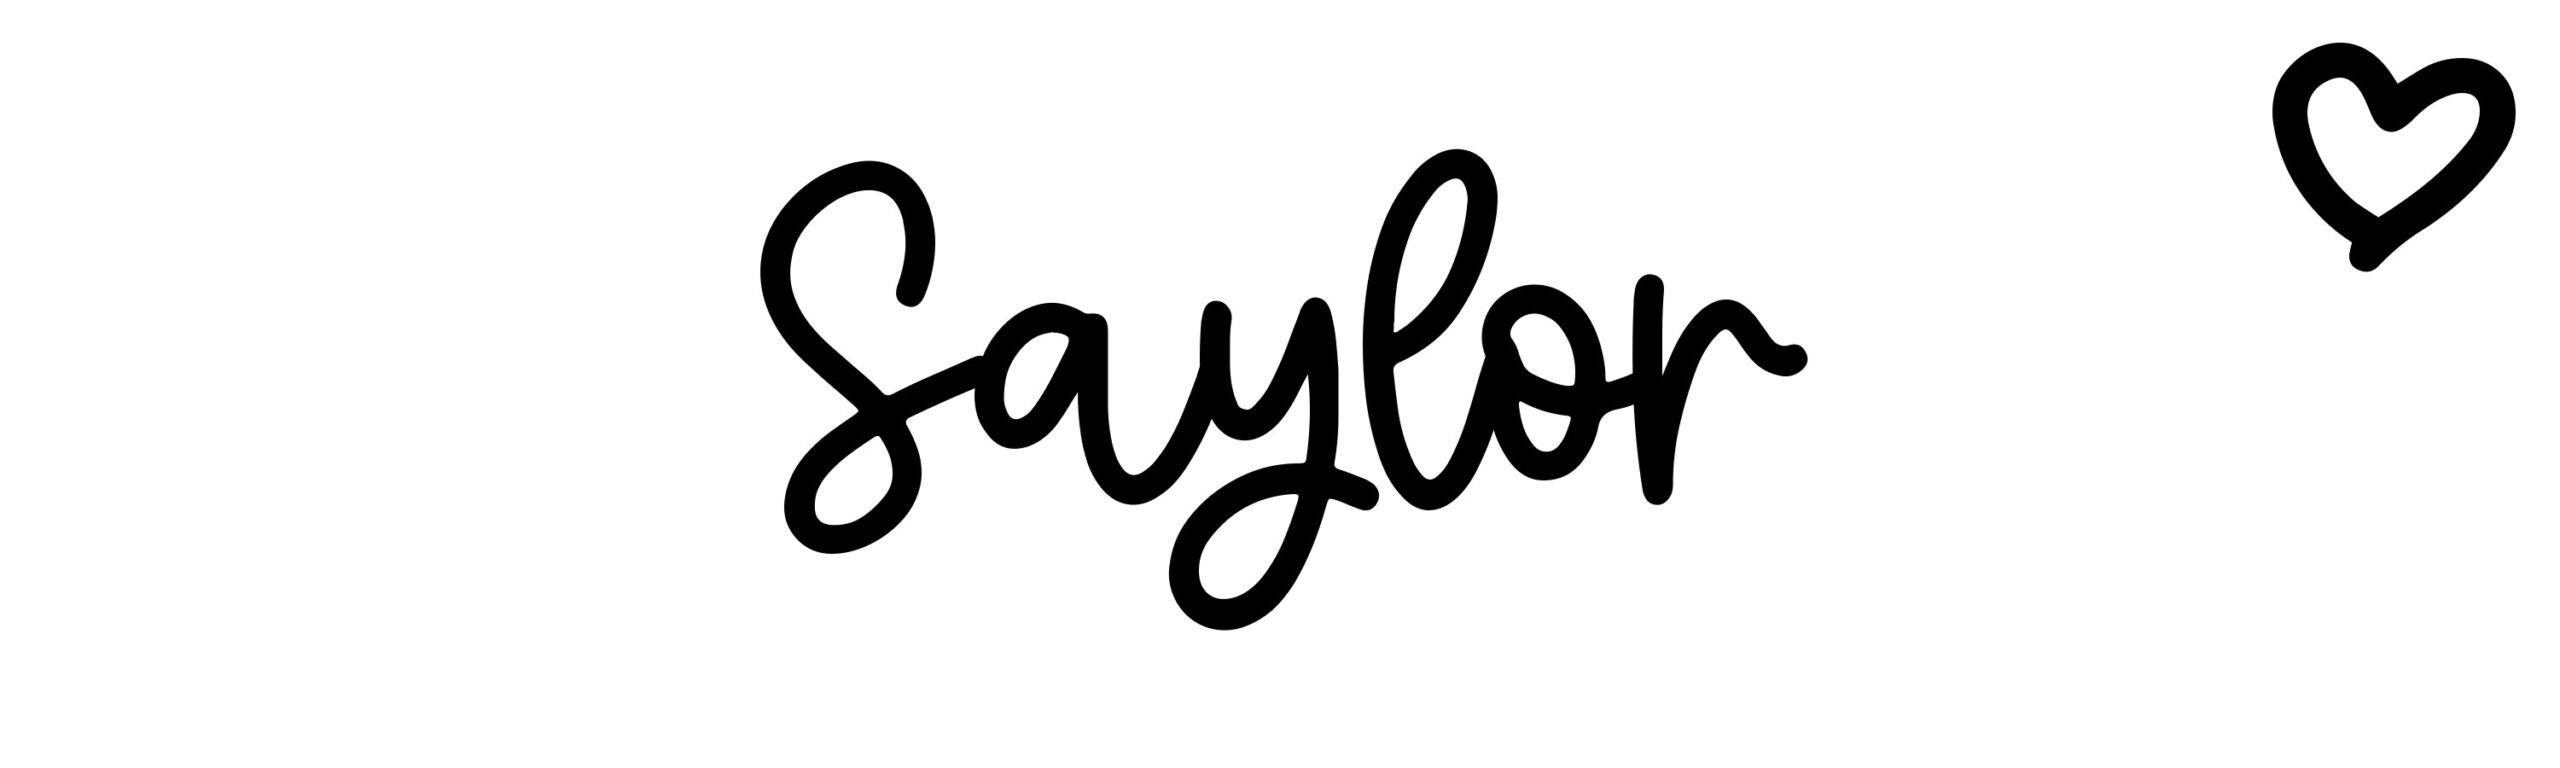 Saylor - Name meaning, origin, variations and more